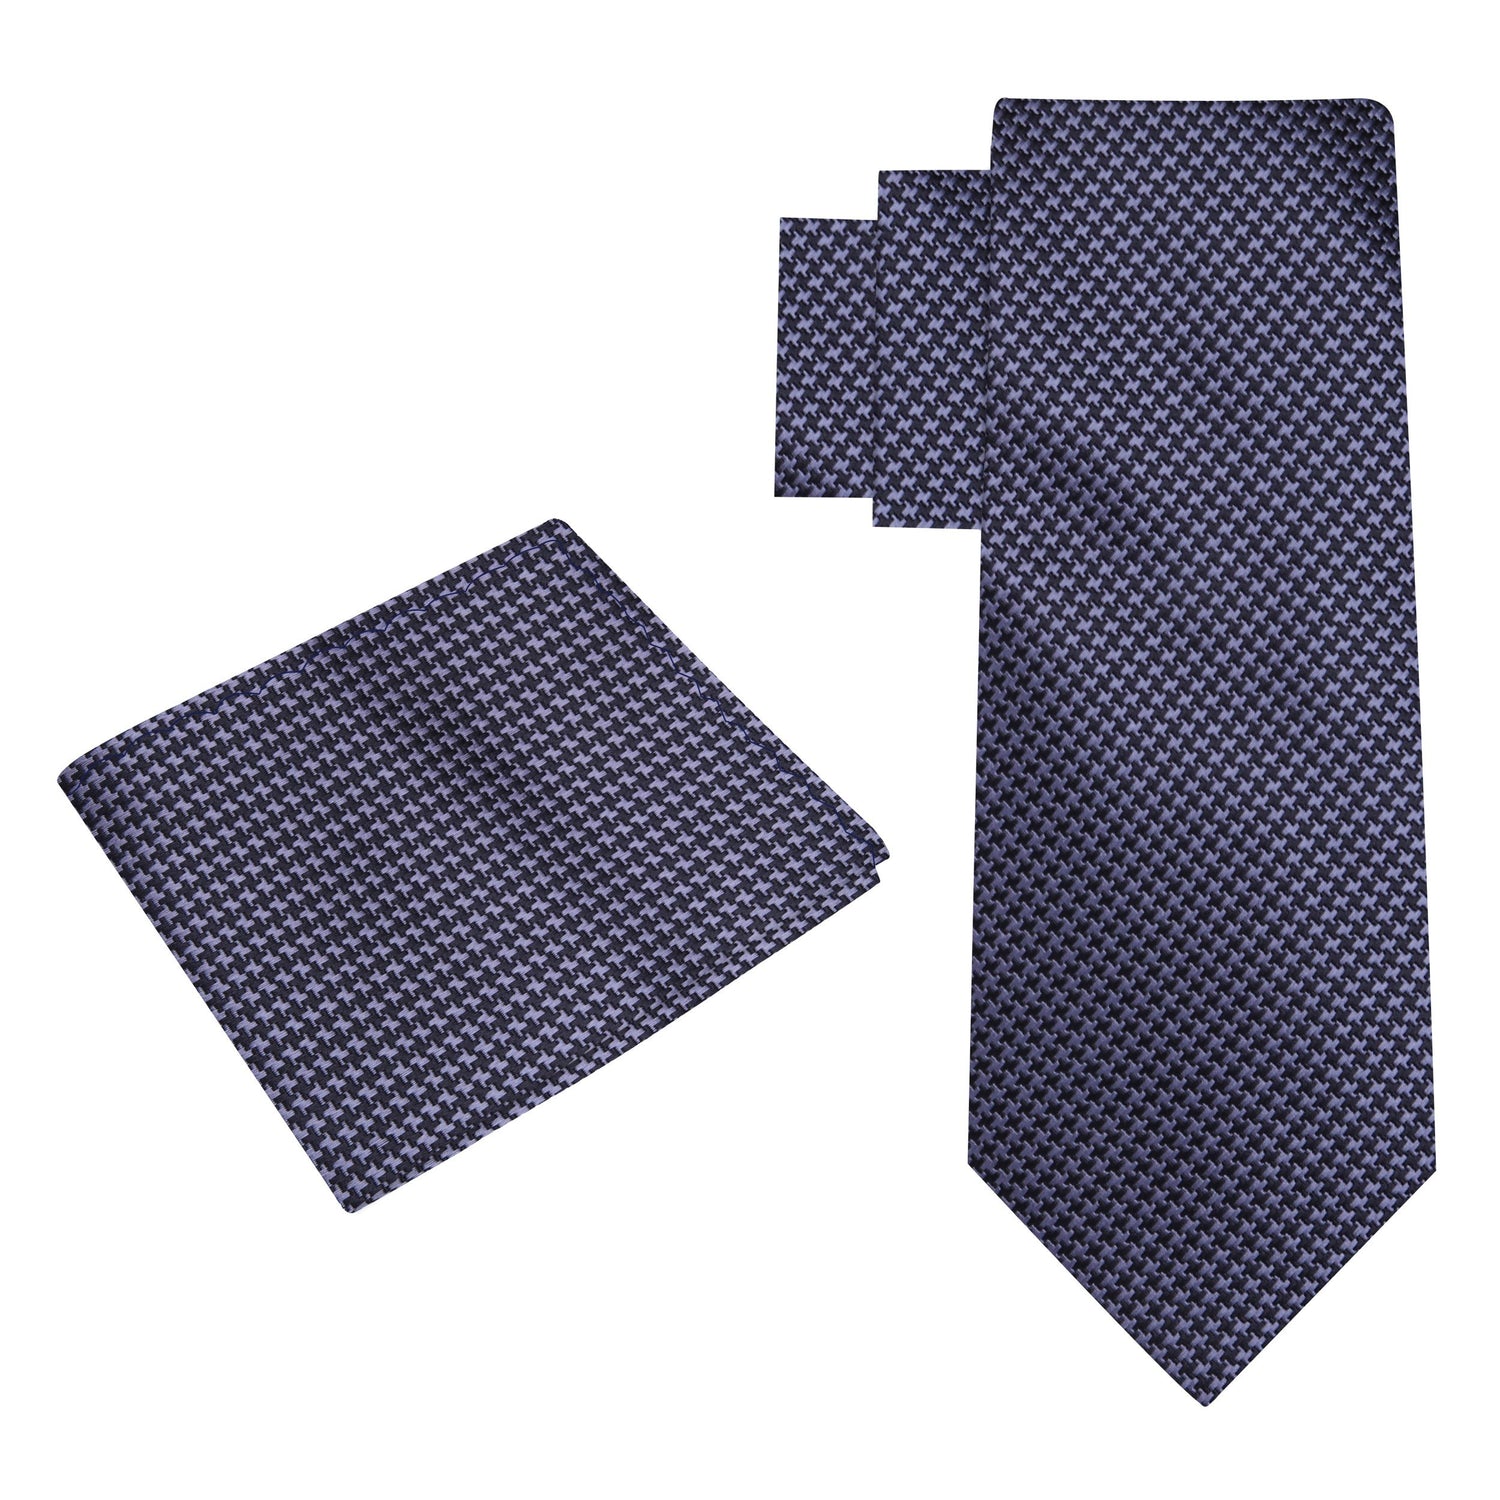 Alt view; Silver, Black Hounds-Tooth Tie and Pocket Square